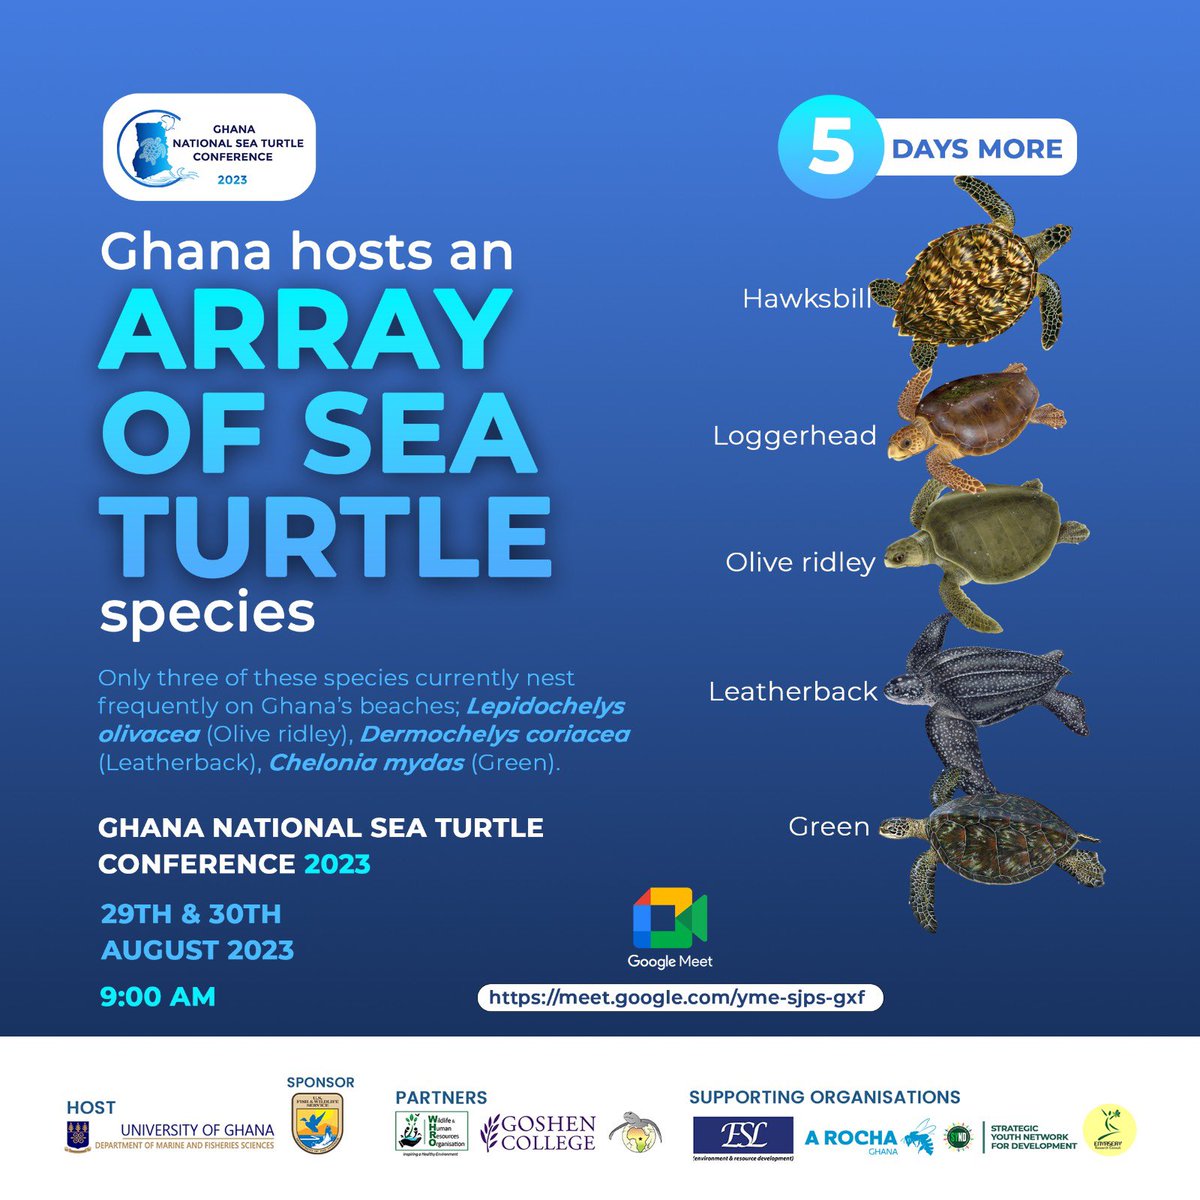 5️⃣ more days to go🚀
Do you want to learn more about the #seaturtle in #Ghana?
Register and join us on the 29th and 30th of August 2023 for the 2nd Ghana National Sea Turtle Conference 2023.
Link: forms.gle/xpMgYiGVPaJfeY…
#SeaTurtleConferenceGH #MarineConservation #SaveTheTurtles